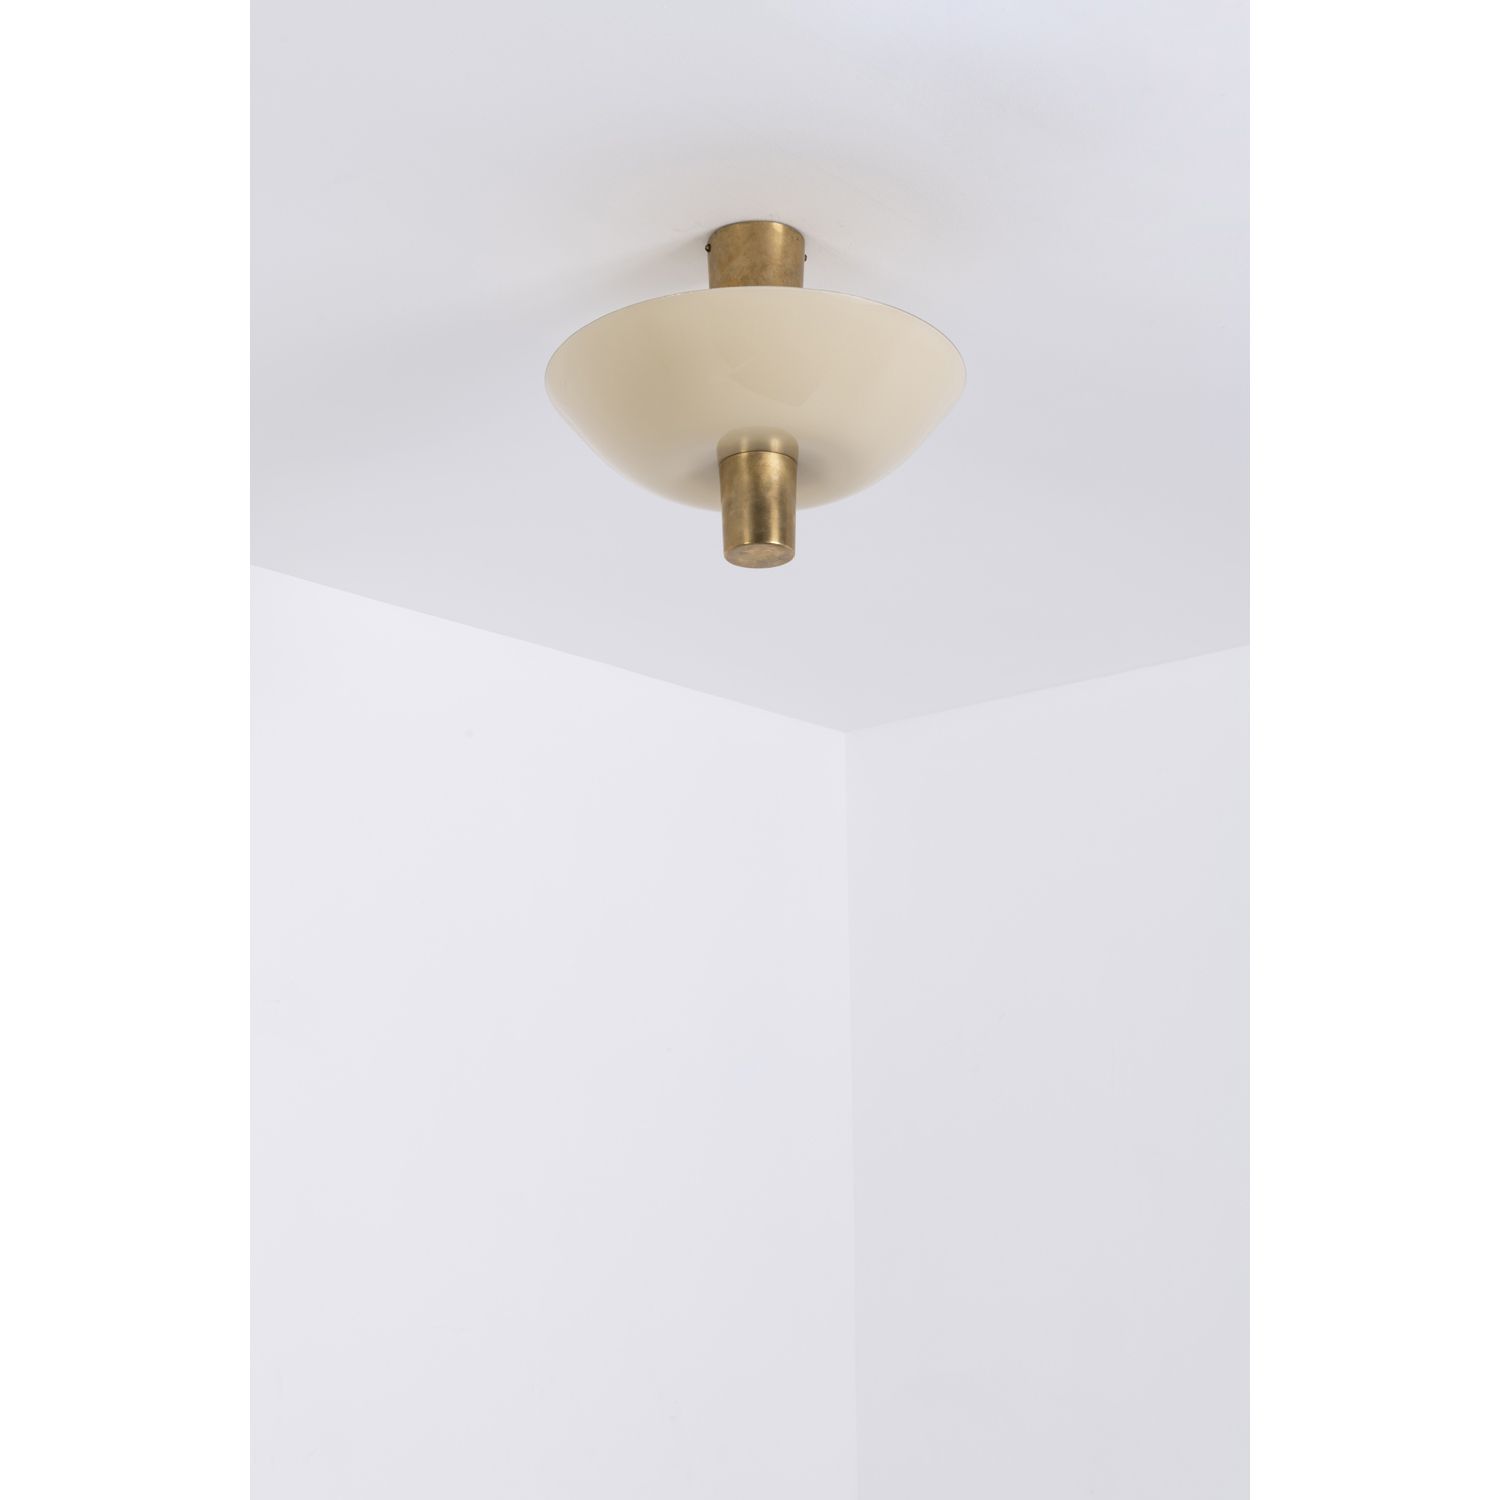 Null Paavo Tynell (1890-1973)

Ceiling lamp

Brass and opaque tinted glass

Edit&hellip;